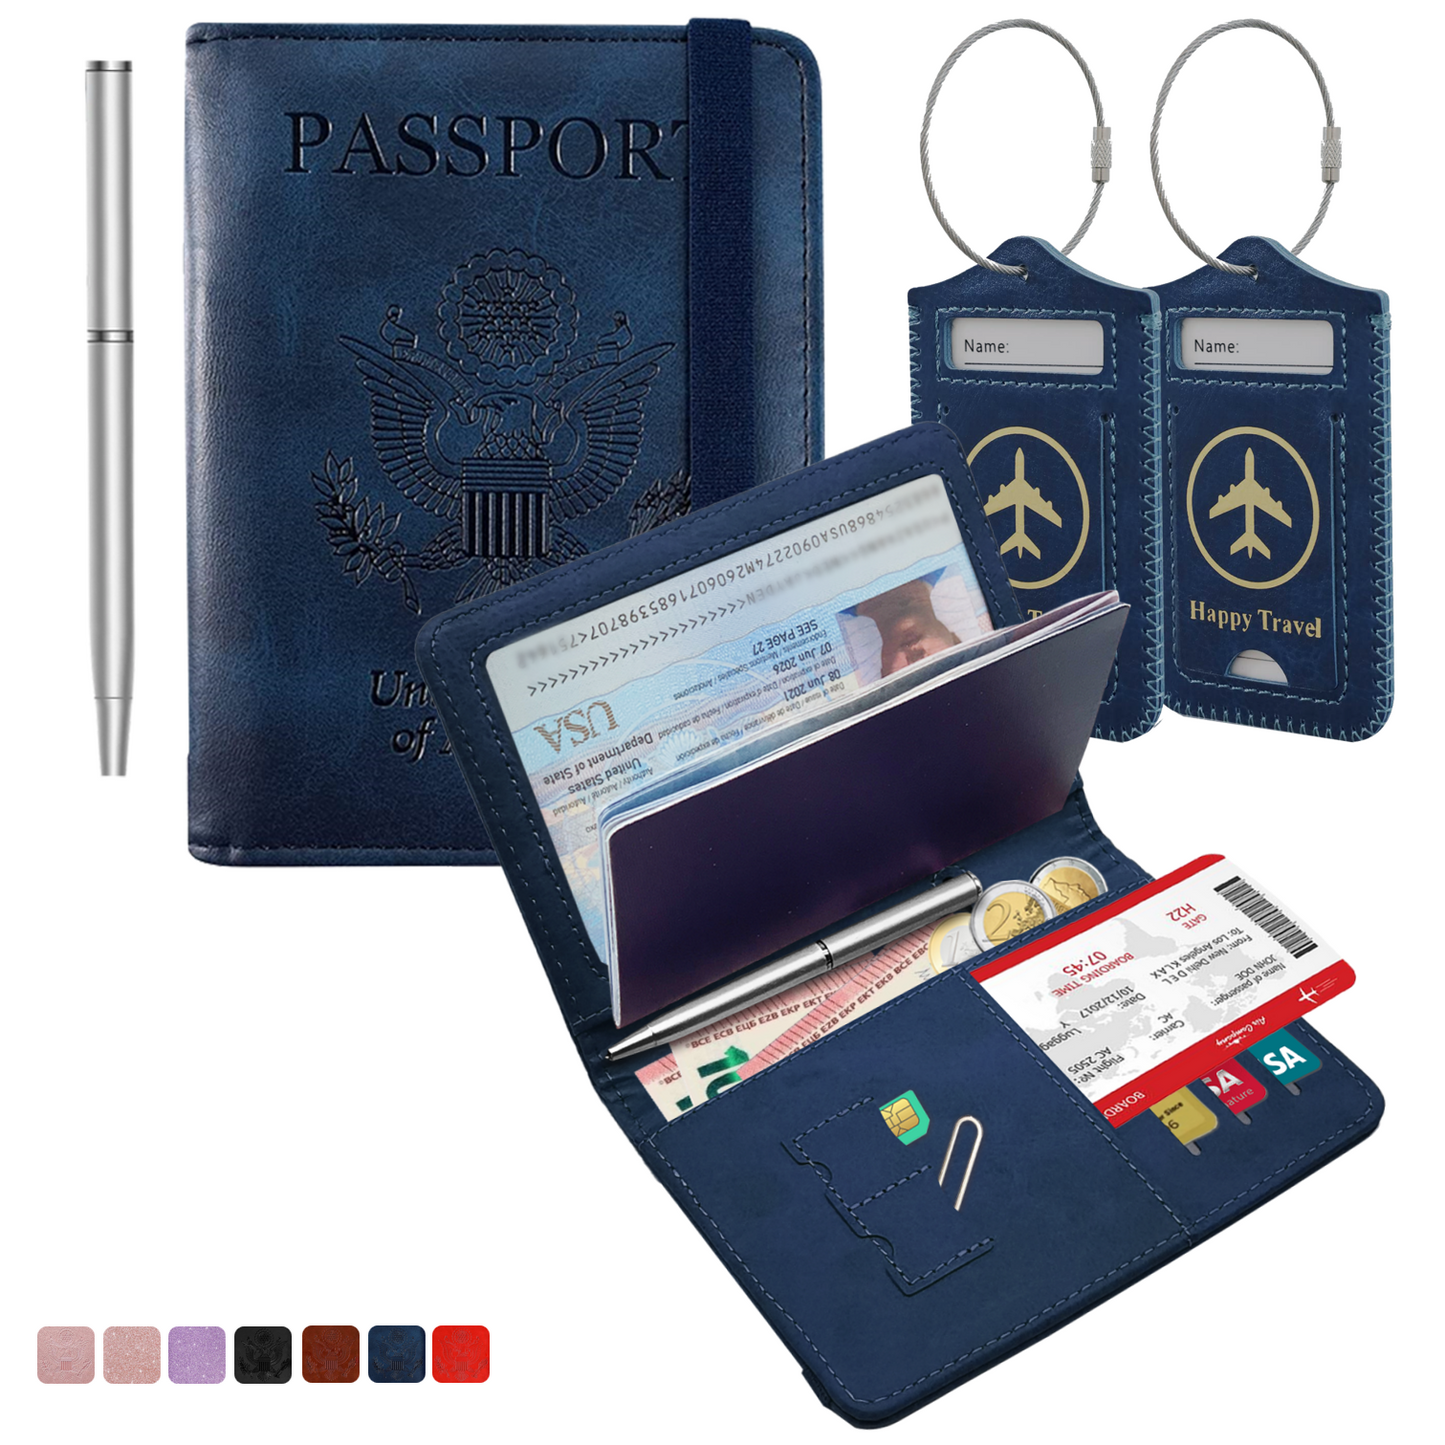 Passport Holder and Luggage Tags Set